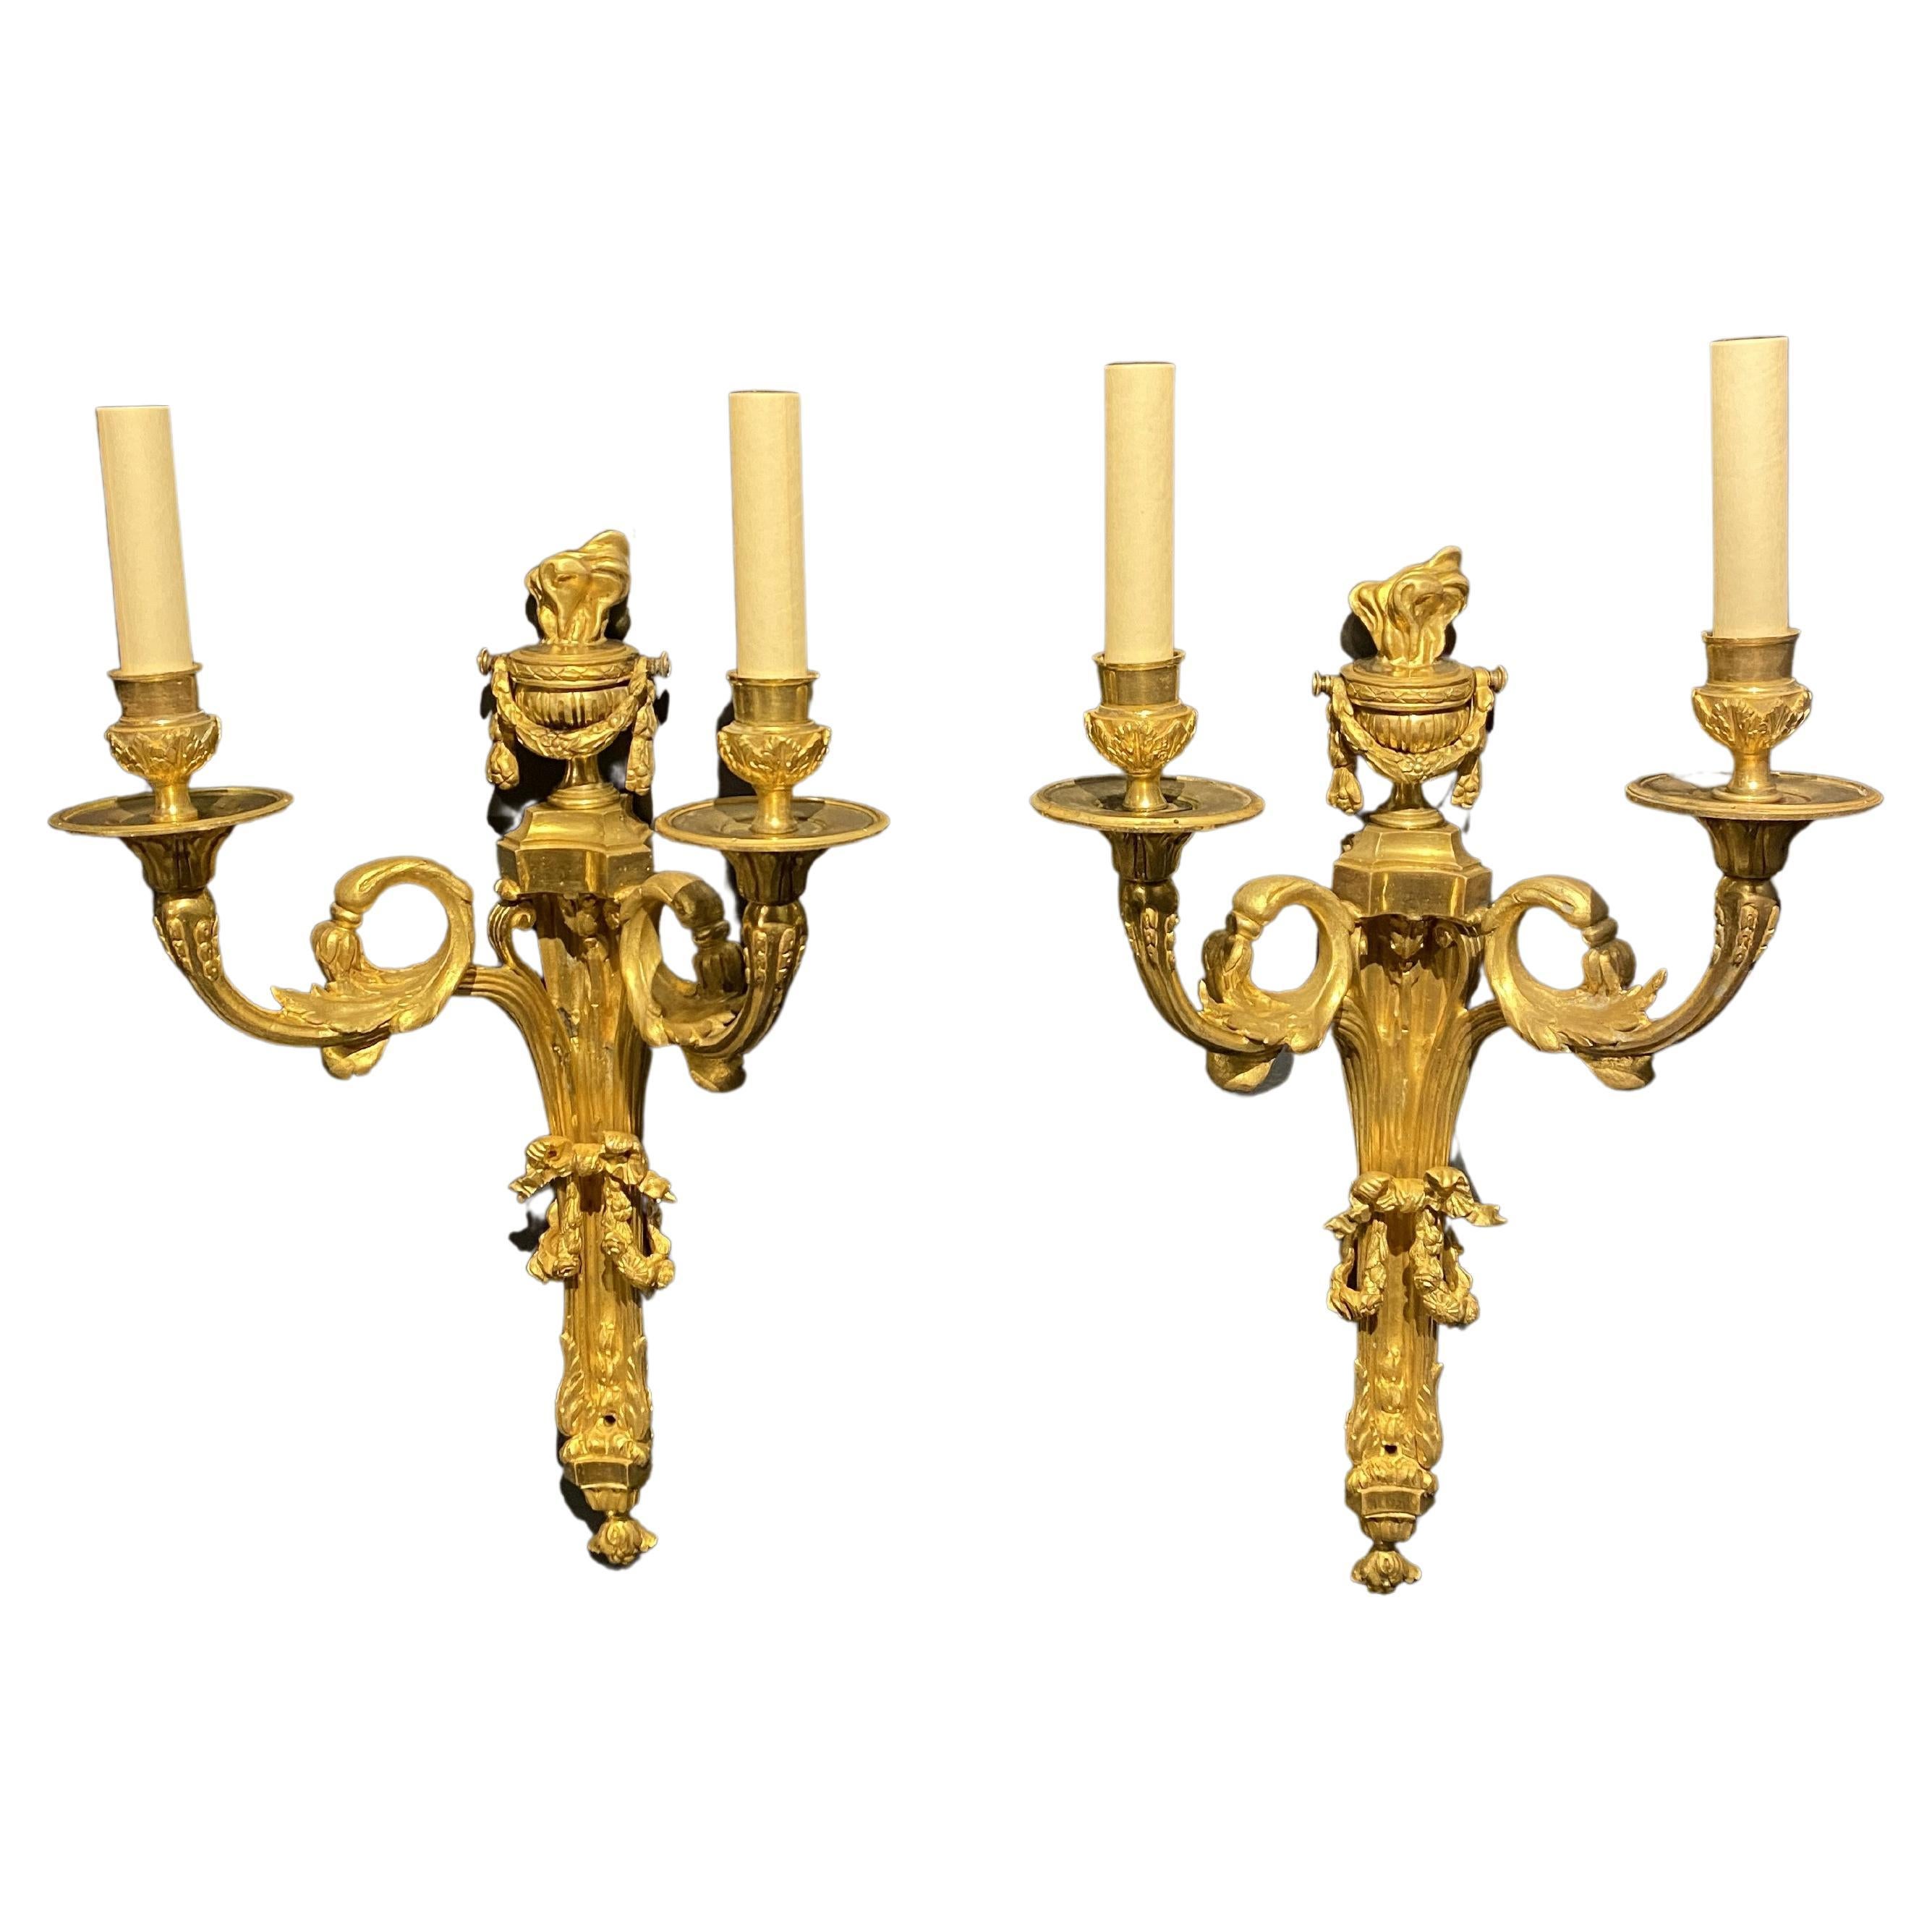 A pair of circa 1900's French gilt bronze sconces with twisted arms